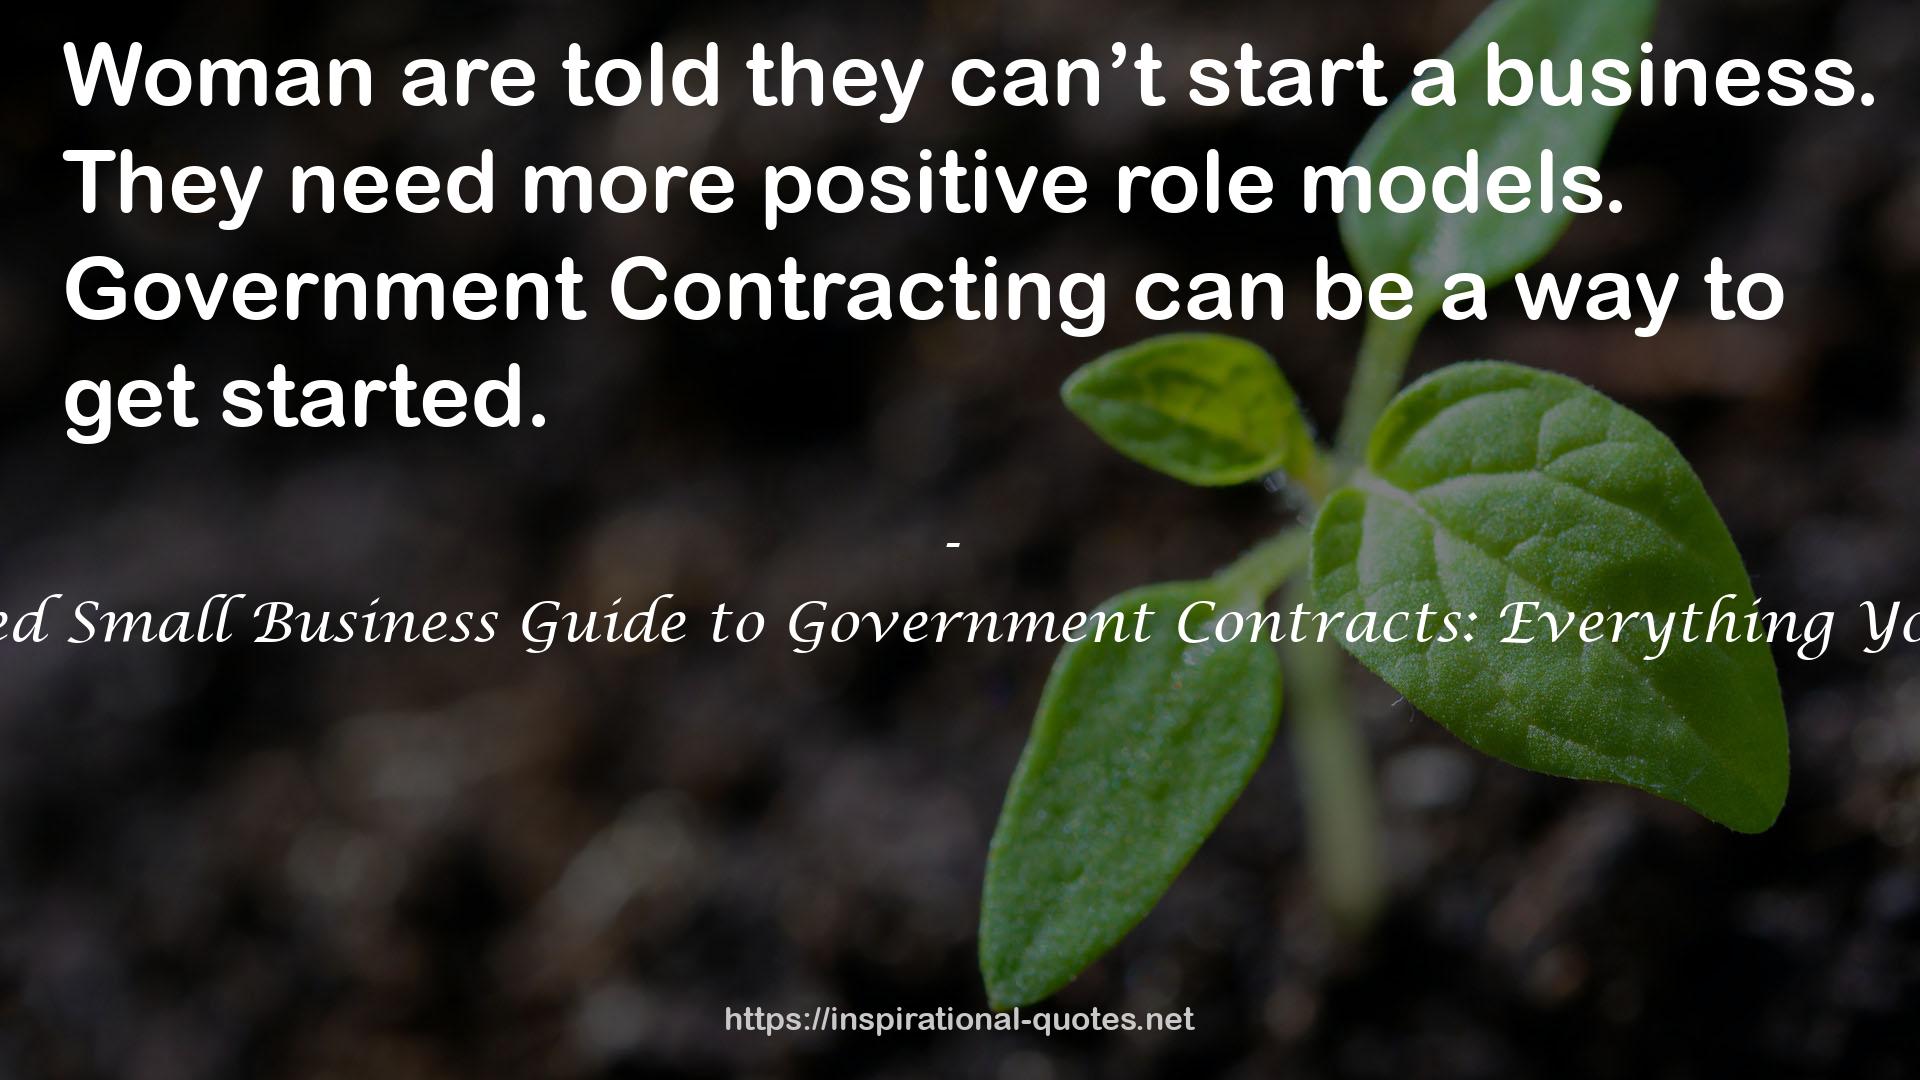 The Minority and Women-Owned Small Business Guide to Government Contracts: Everything You Need to Know to Get Started QUOTES